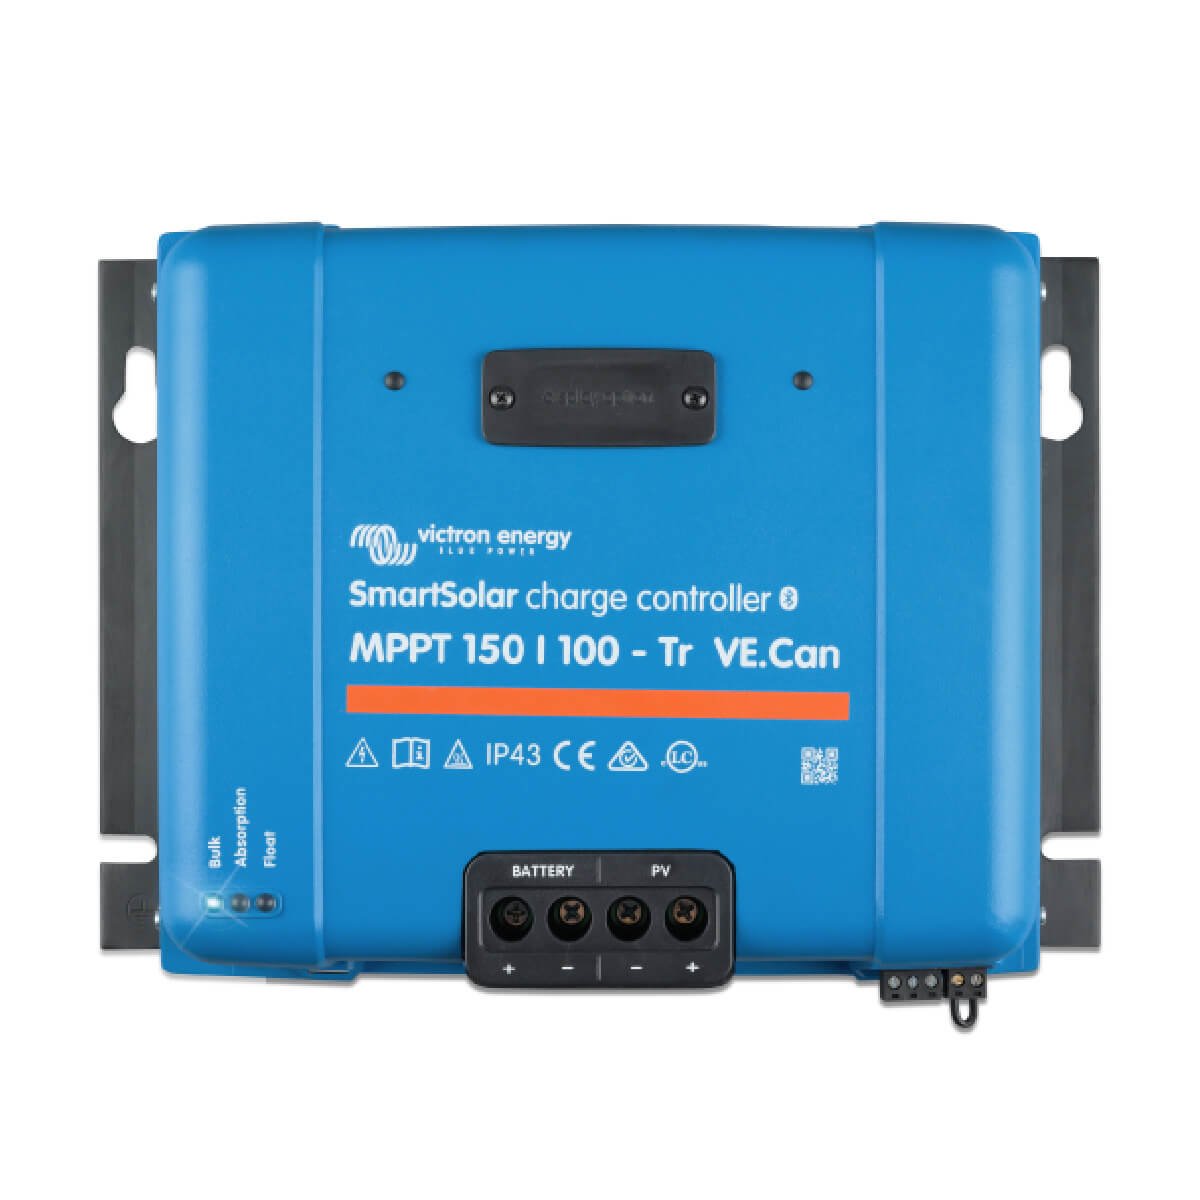 The blue Victron MPPT 150/100 - SmartSolar Charge Controller - Tr VE.Can (12/24V or 48V) with model label MPPT 150/100-Tr VE.Can, featuring various ports.